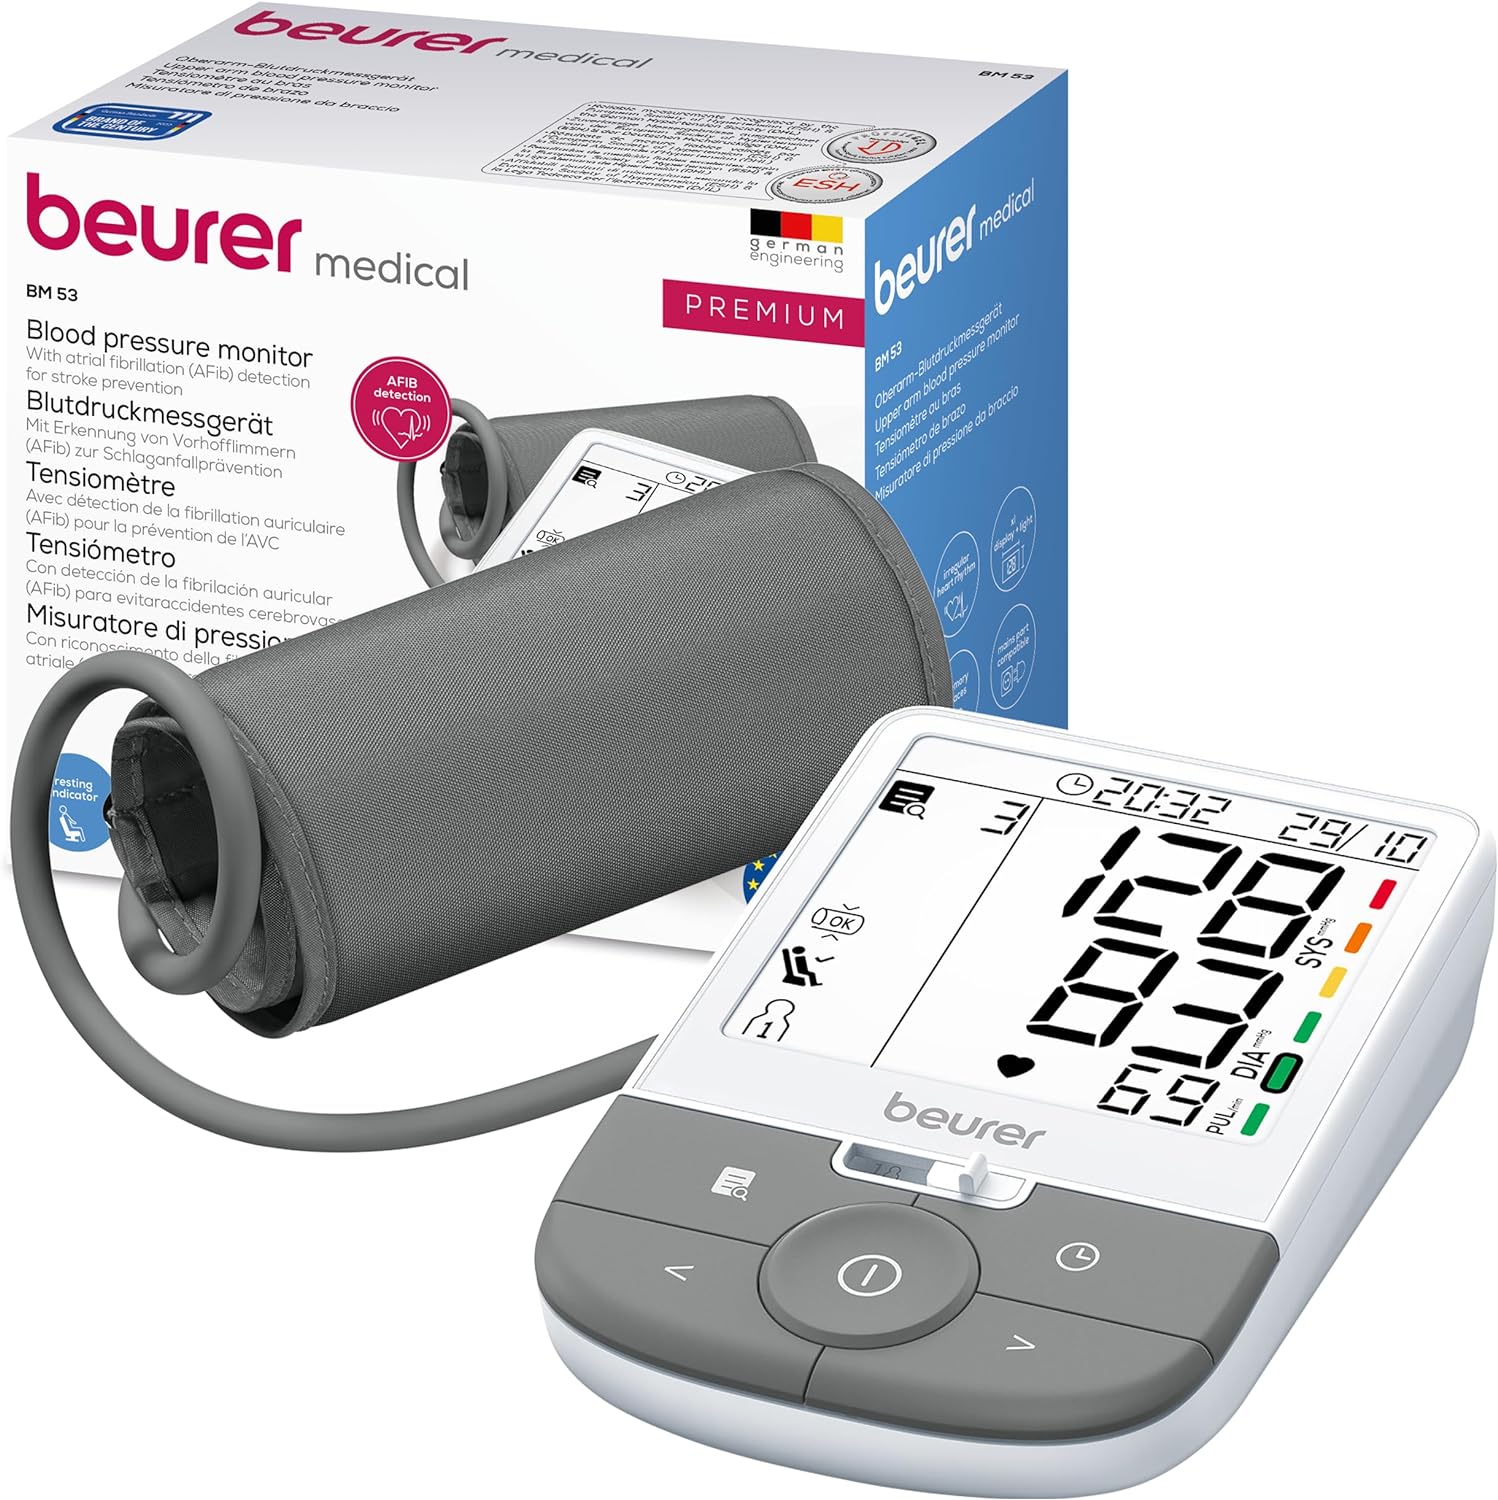 Beurer BM 53 Upper ARM Blood Pressure Monitor Clinically Validated Atrial Fibrillation Detection (AFIB) for Stroke Prevention With Risk Indicator for ARM Circumference 22-42 cm Illuminated XL Display